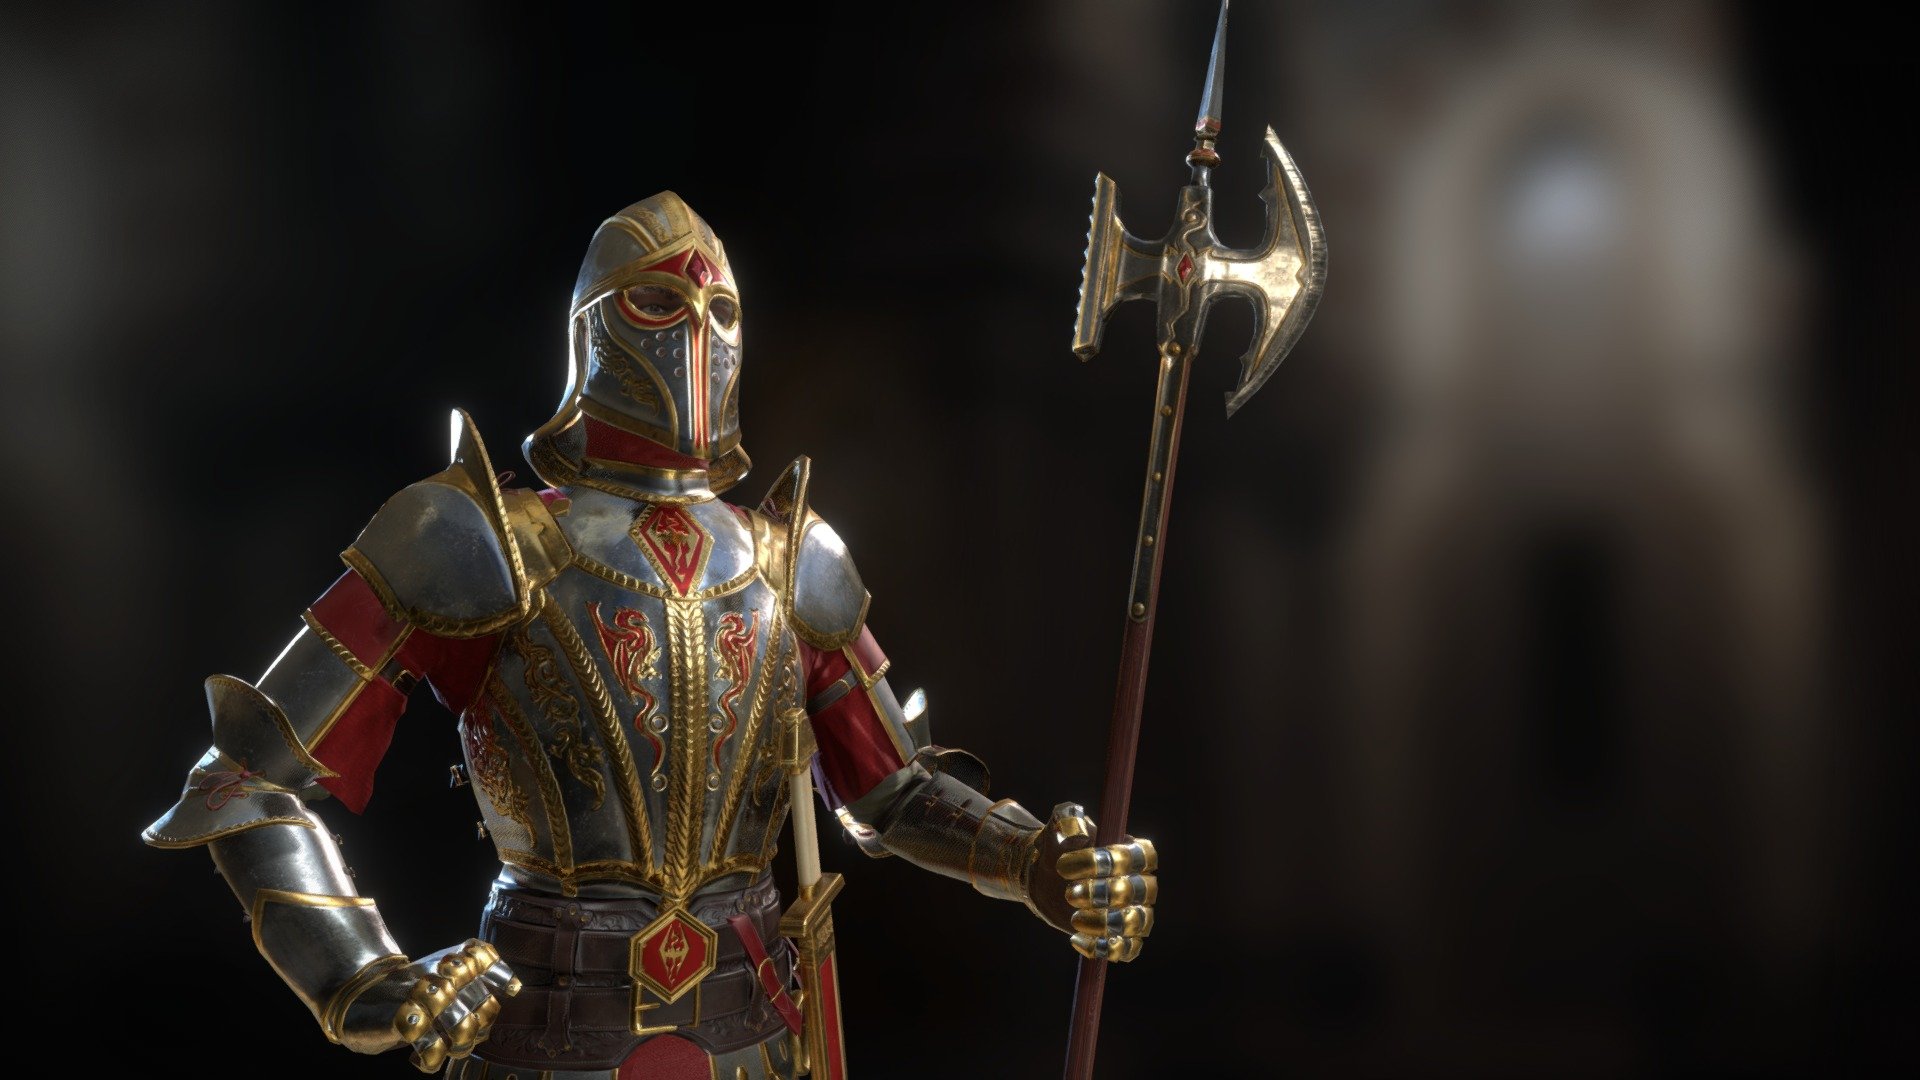 I had the privilege to work with the super chill and talented teammate, Gabriel Eekenulv, Skyblivion's Concept Art Lead. Together we produced this grand and regal set of armor. As a historical arms and armor enthusiast, I often time find it difficult to work with many fantasy concept arts. Most designs sacrifice basic understanding and practicality for &ldquo;cool